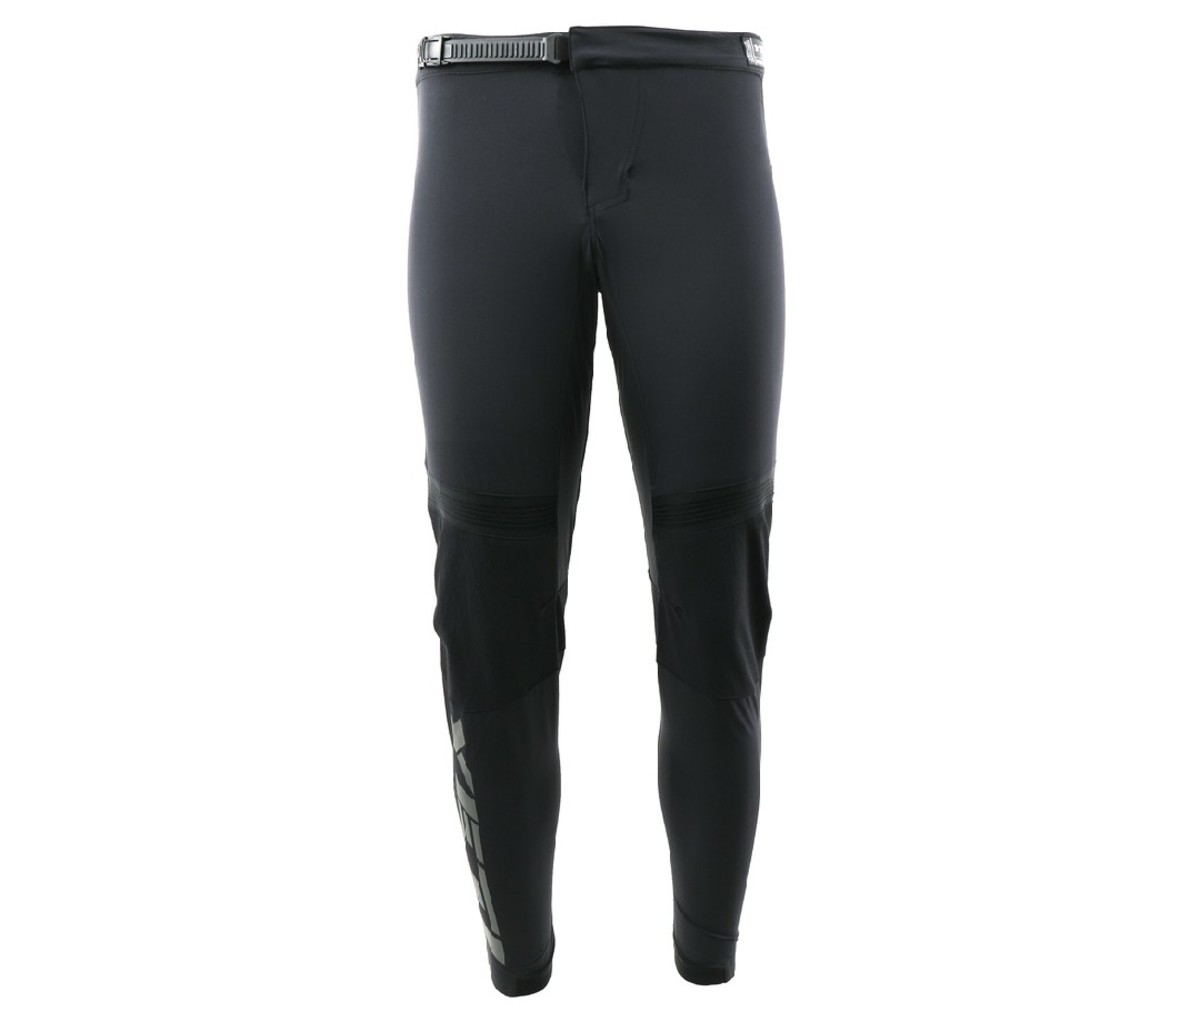 Alo Yoga - Our Ripped Warrior Legging gets a crisp new